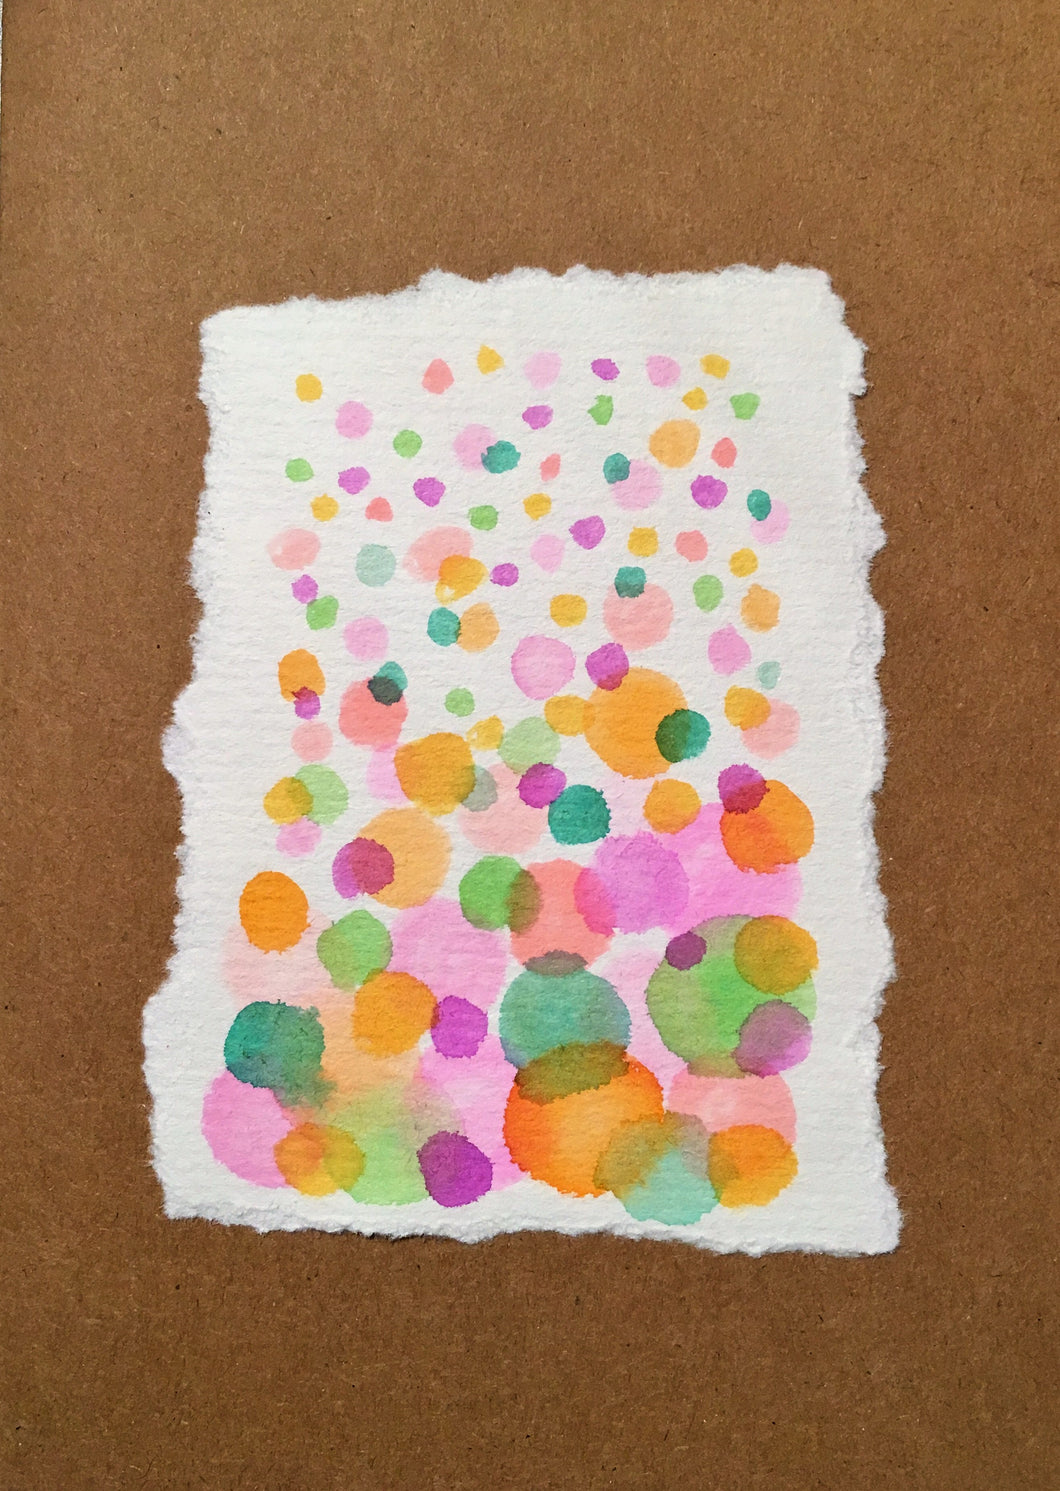 Handpainted Watercolour Greeting Card - Abstract Bubbles Green/Orange/Pink/Purple - eDgE dEsiGn London